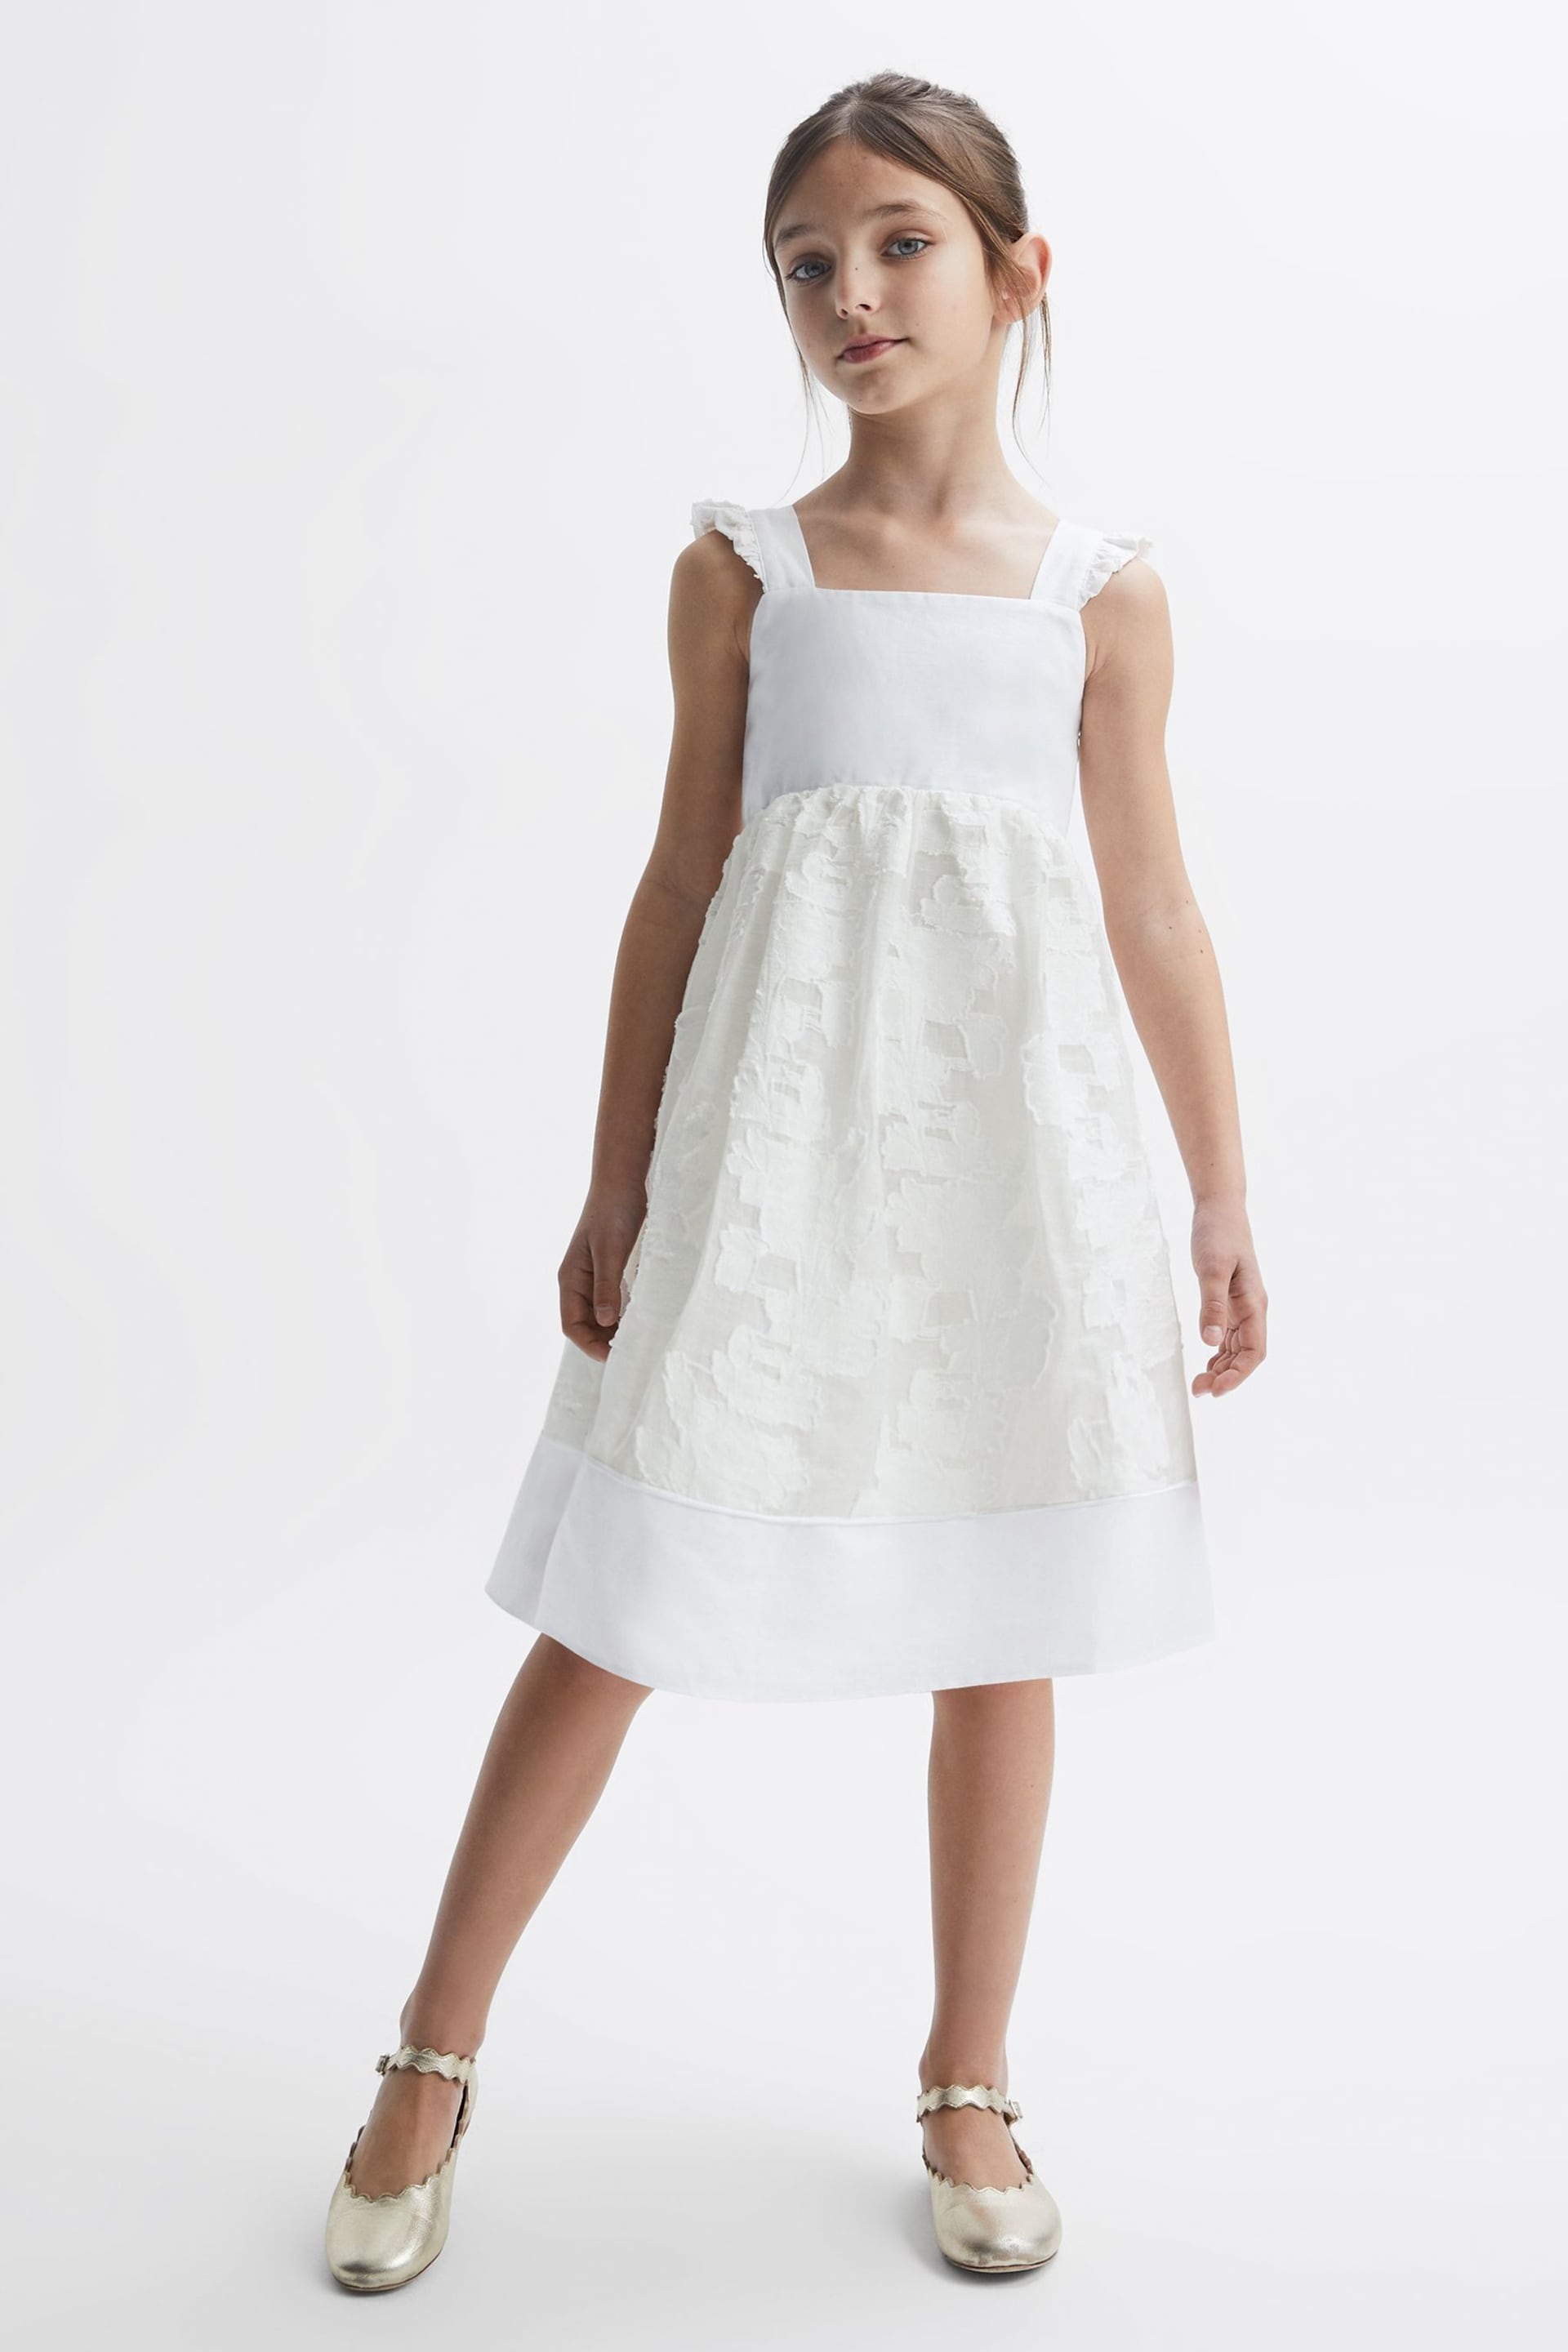 Reiss White Abby Senior Lace Detail Bow Back Dress - Image 1 of 6